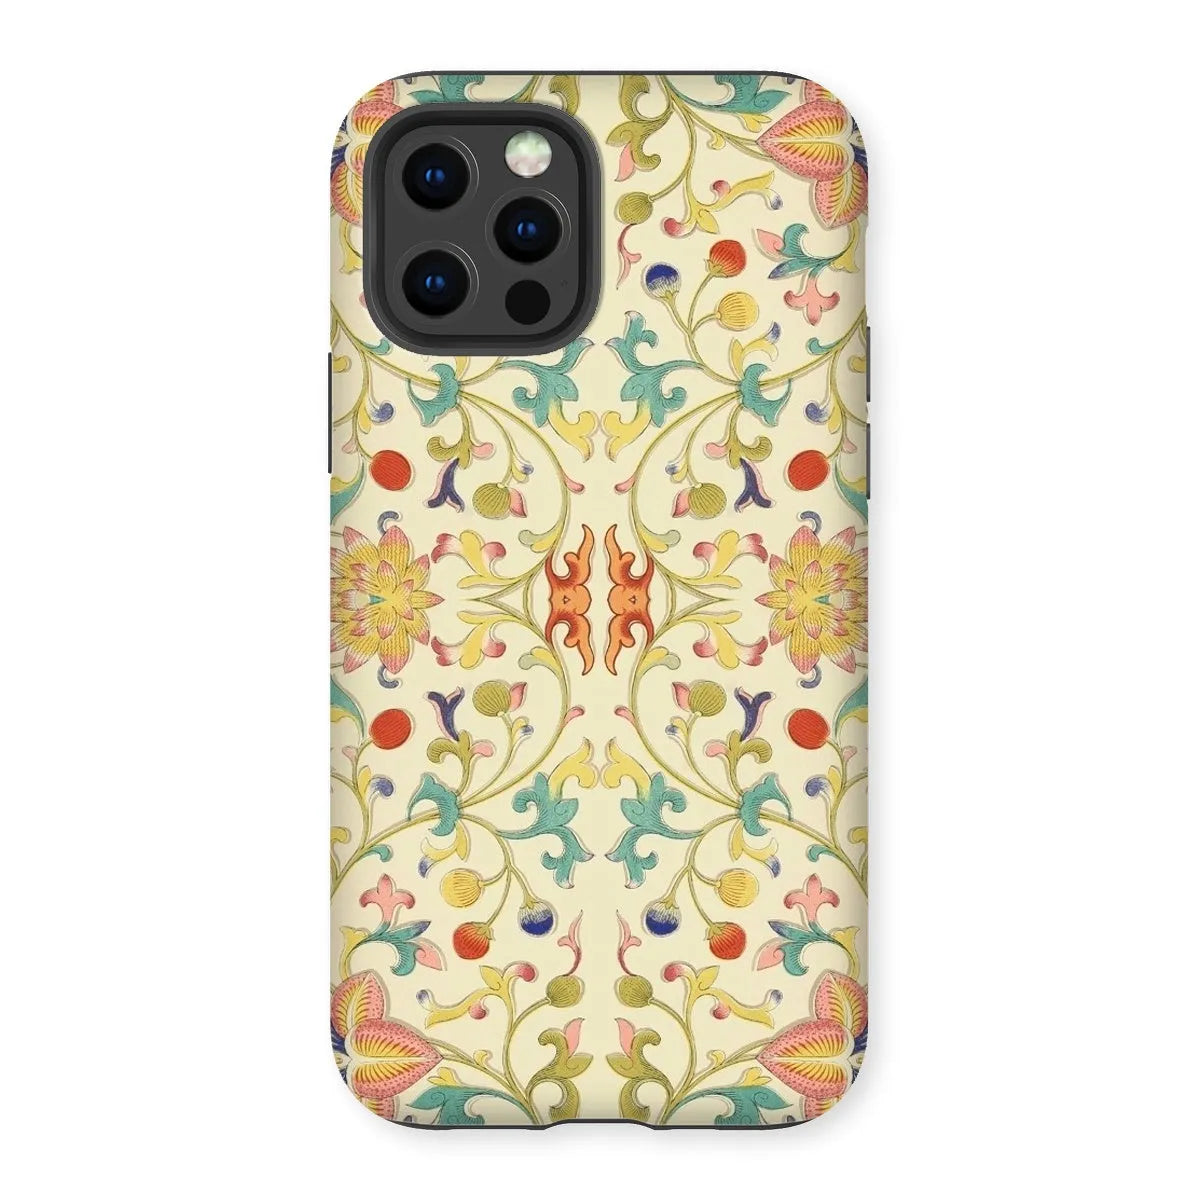 Over The Rainbow - Chinoiserie Pattern Art Phone Case - Iphone 12 Pro / Matte - Mobile Phone Cases - Aesthetic Art